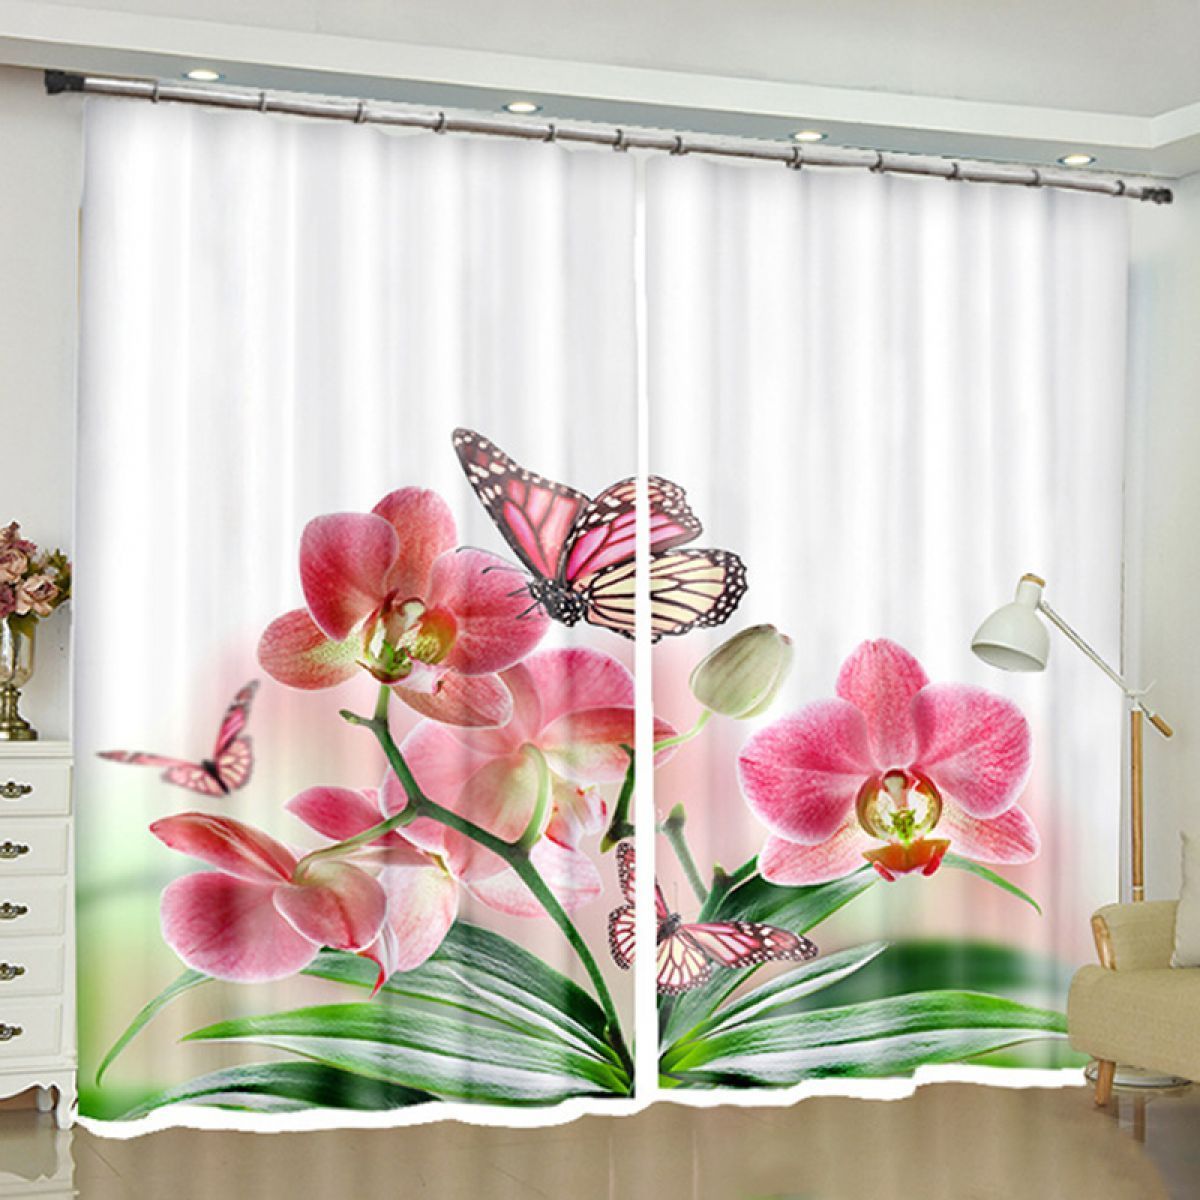 Phalaenopsis And Butterflies Printed Window Curtain Home Decor